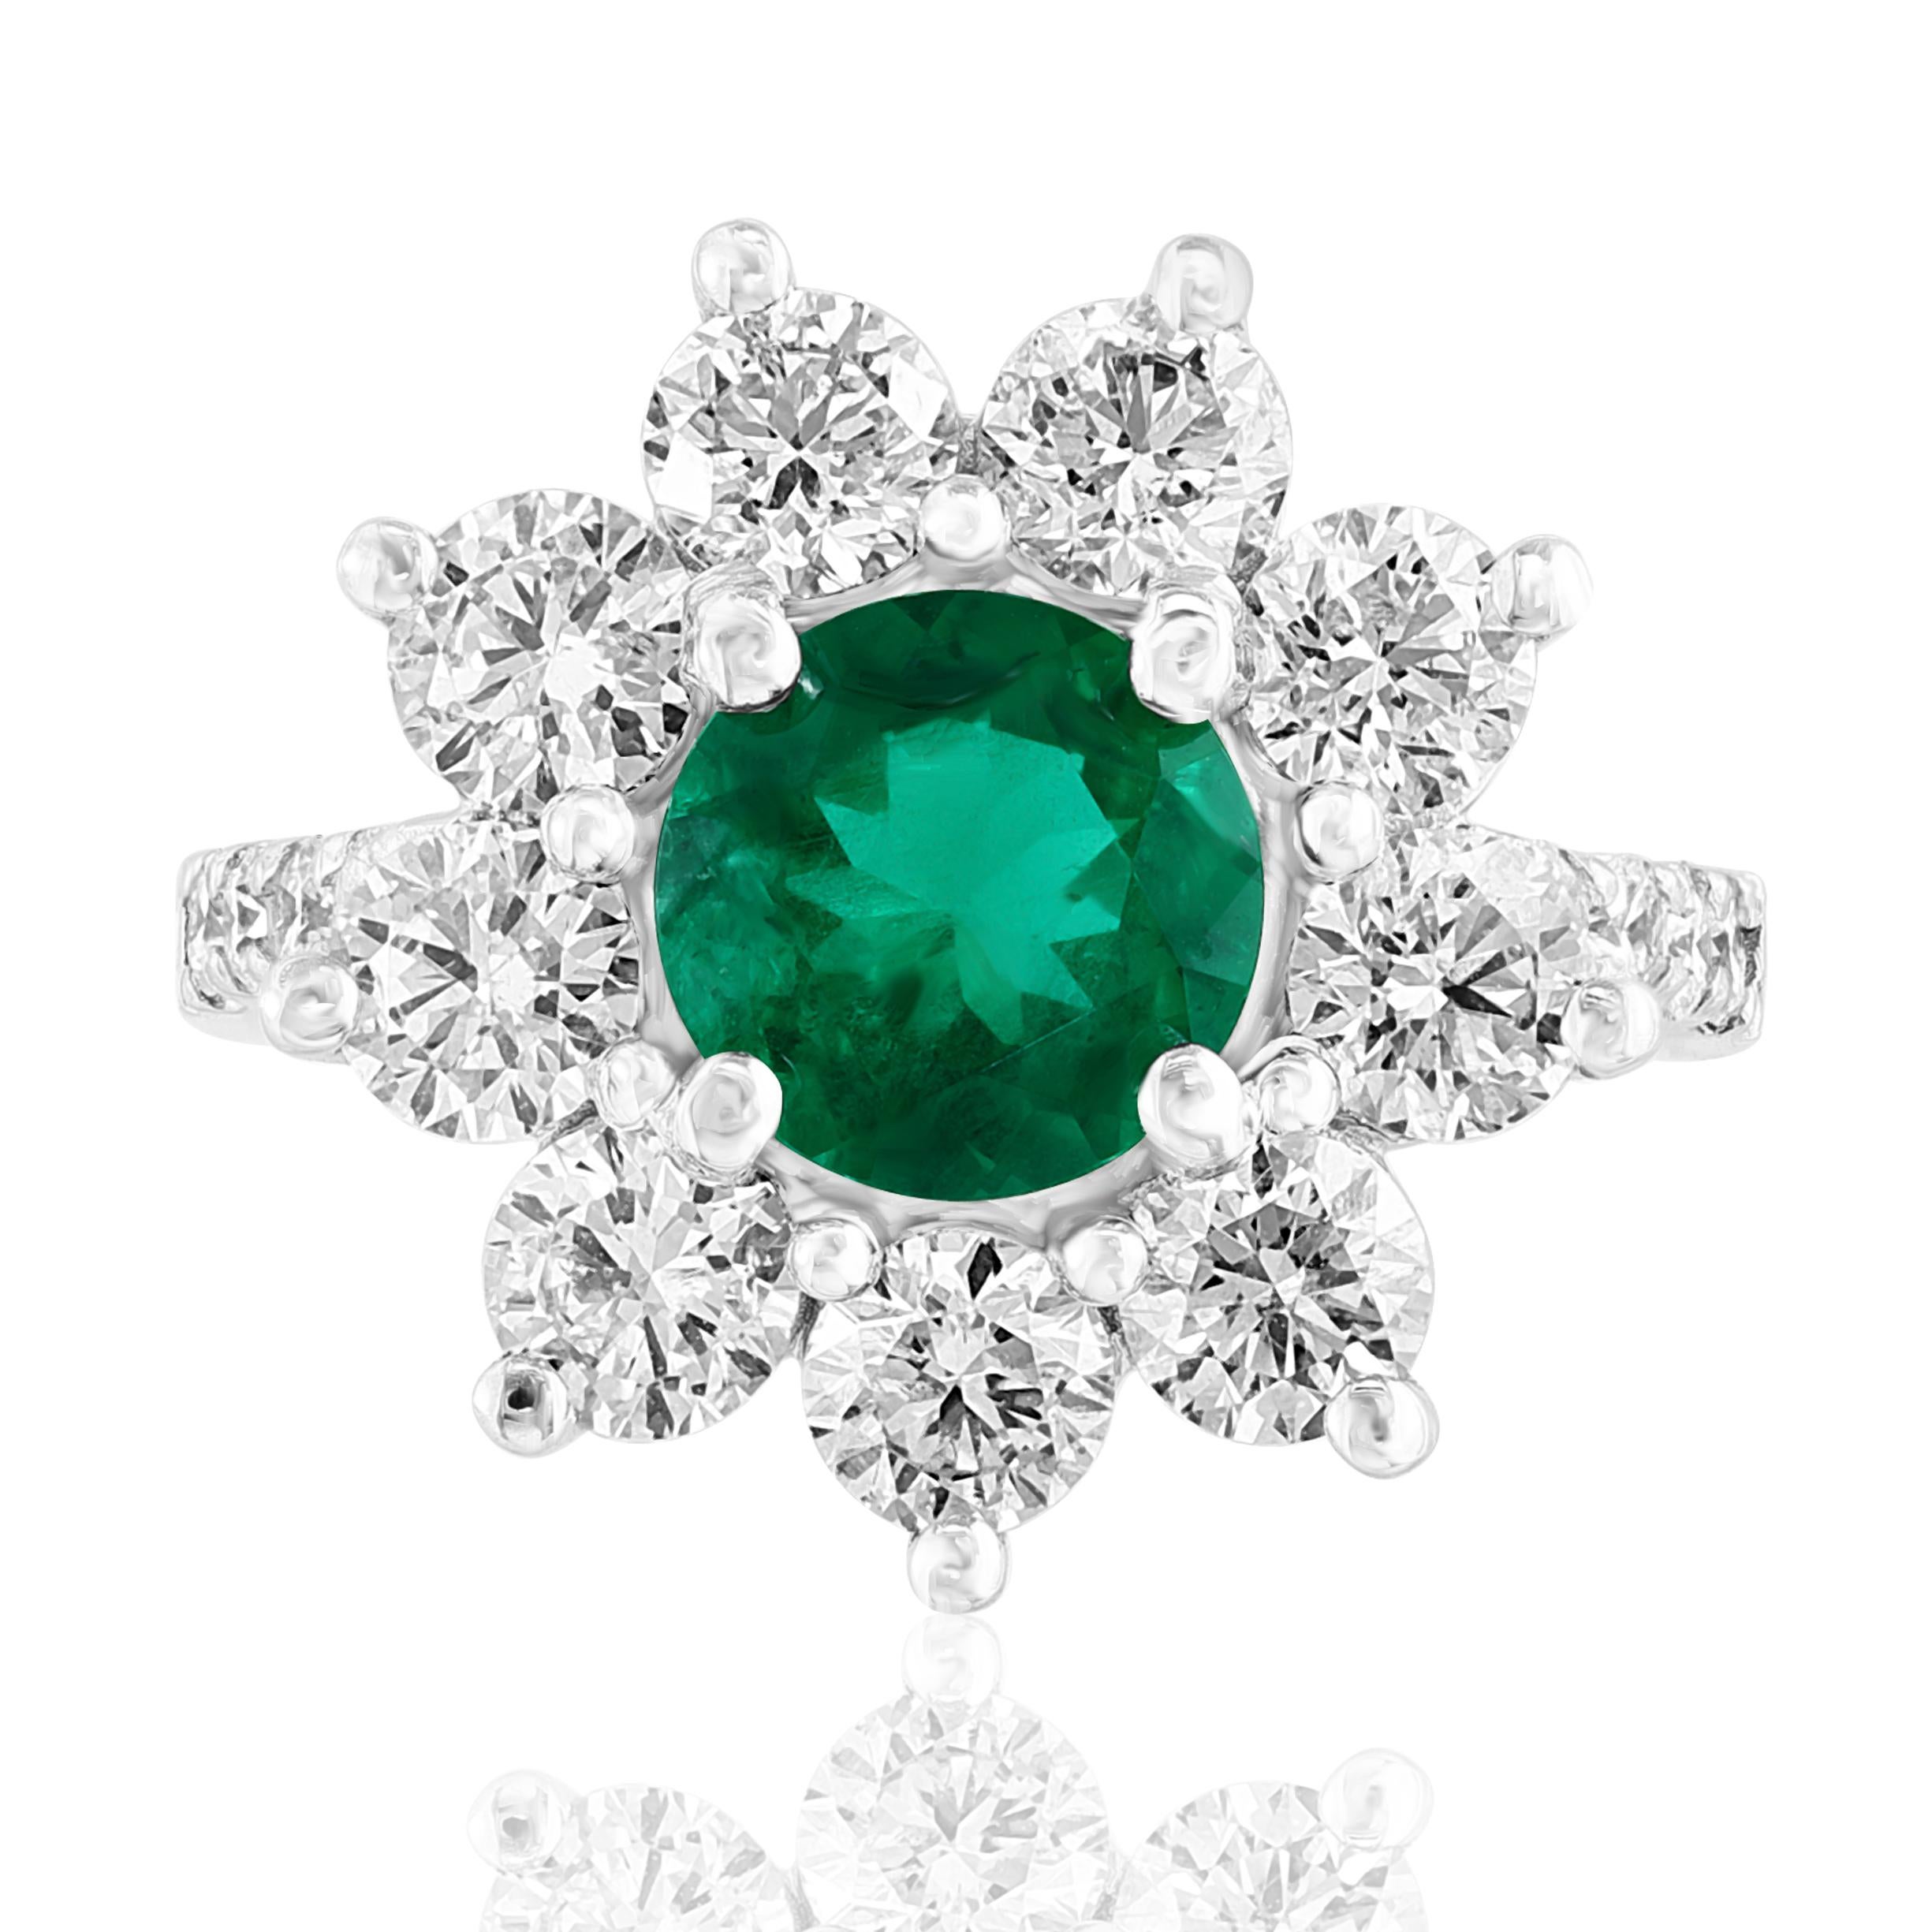 A stunning well-crafted engagement ring showcasing a 1.18-carat brilliant-cut vivid green emerald. Flanking the center diamond are perfectly matched brilliant cut 17 diamonds weighing 2.31 carat in total, set in a polished 14K White Gold mounting.